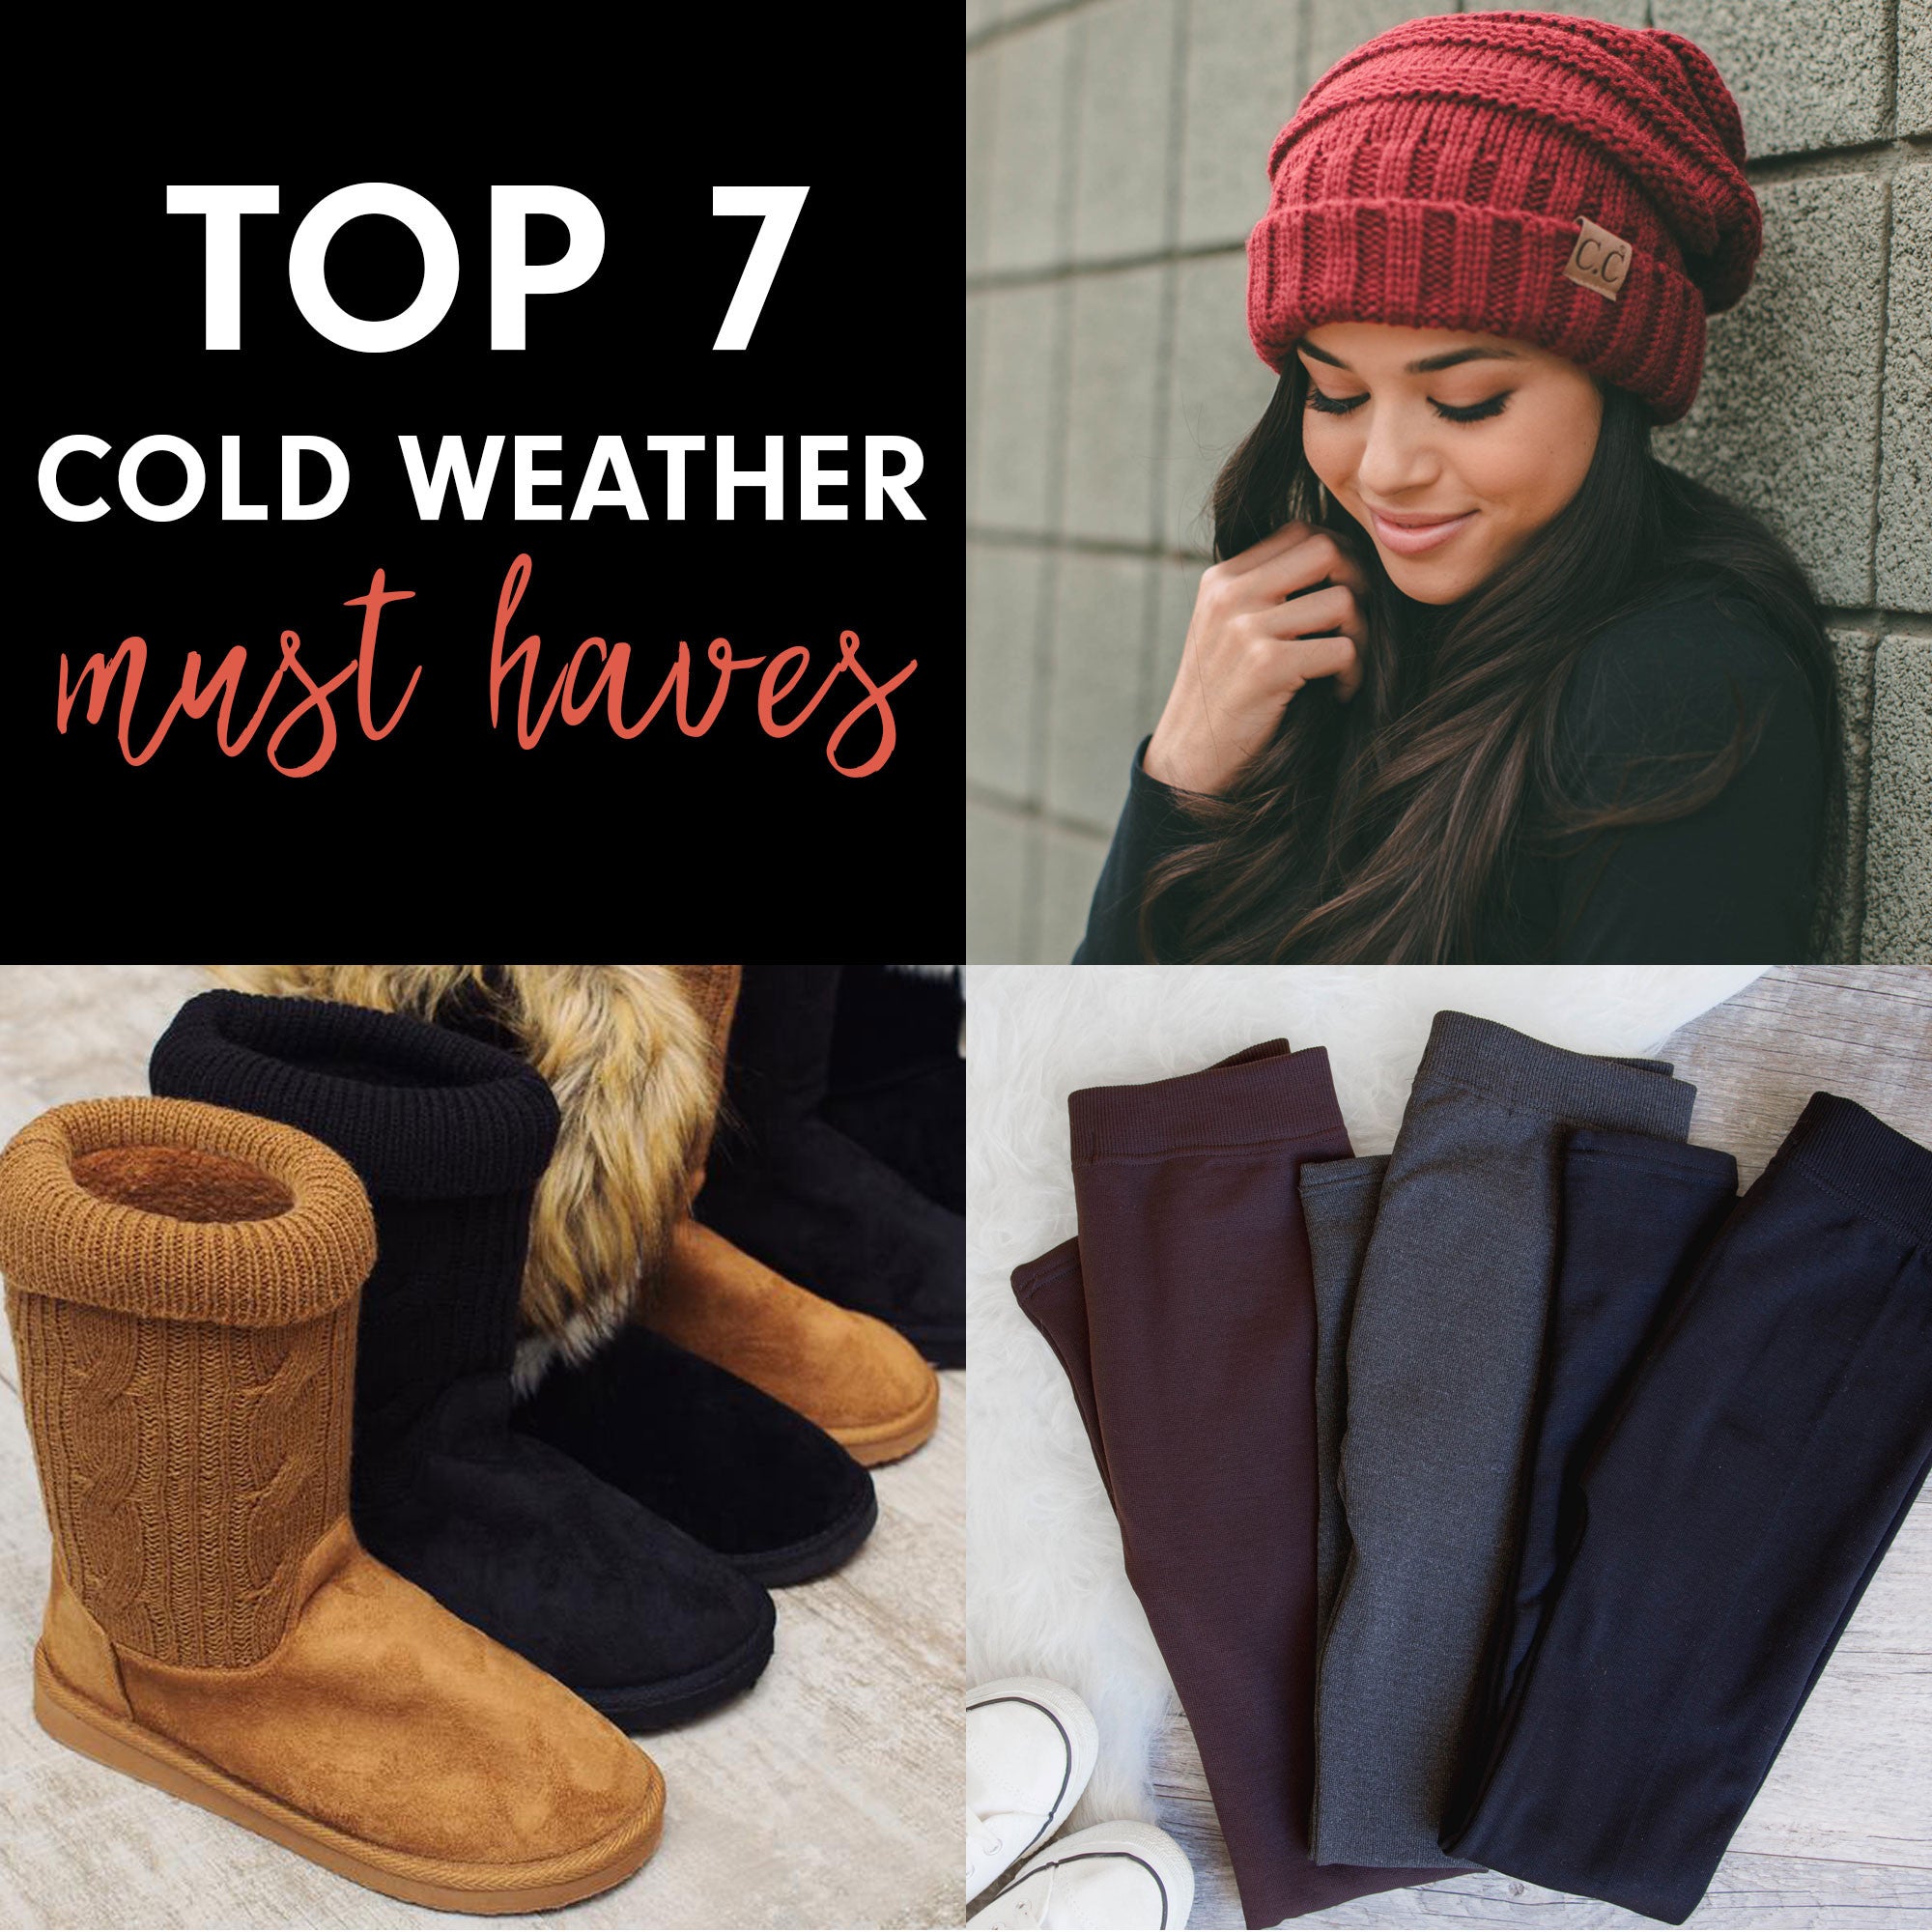 Top 7 Cold Weather Must-Haves